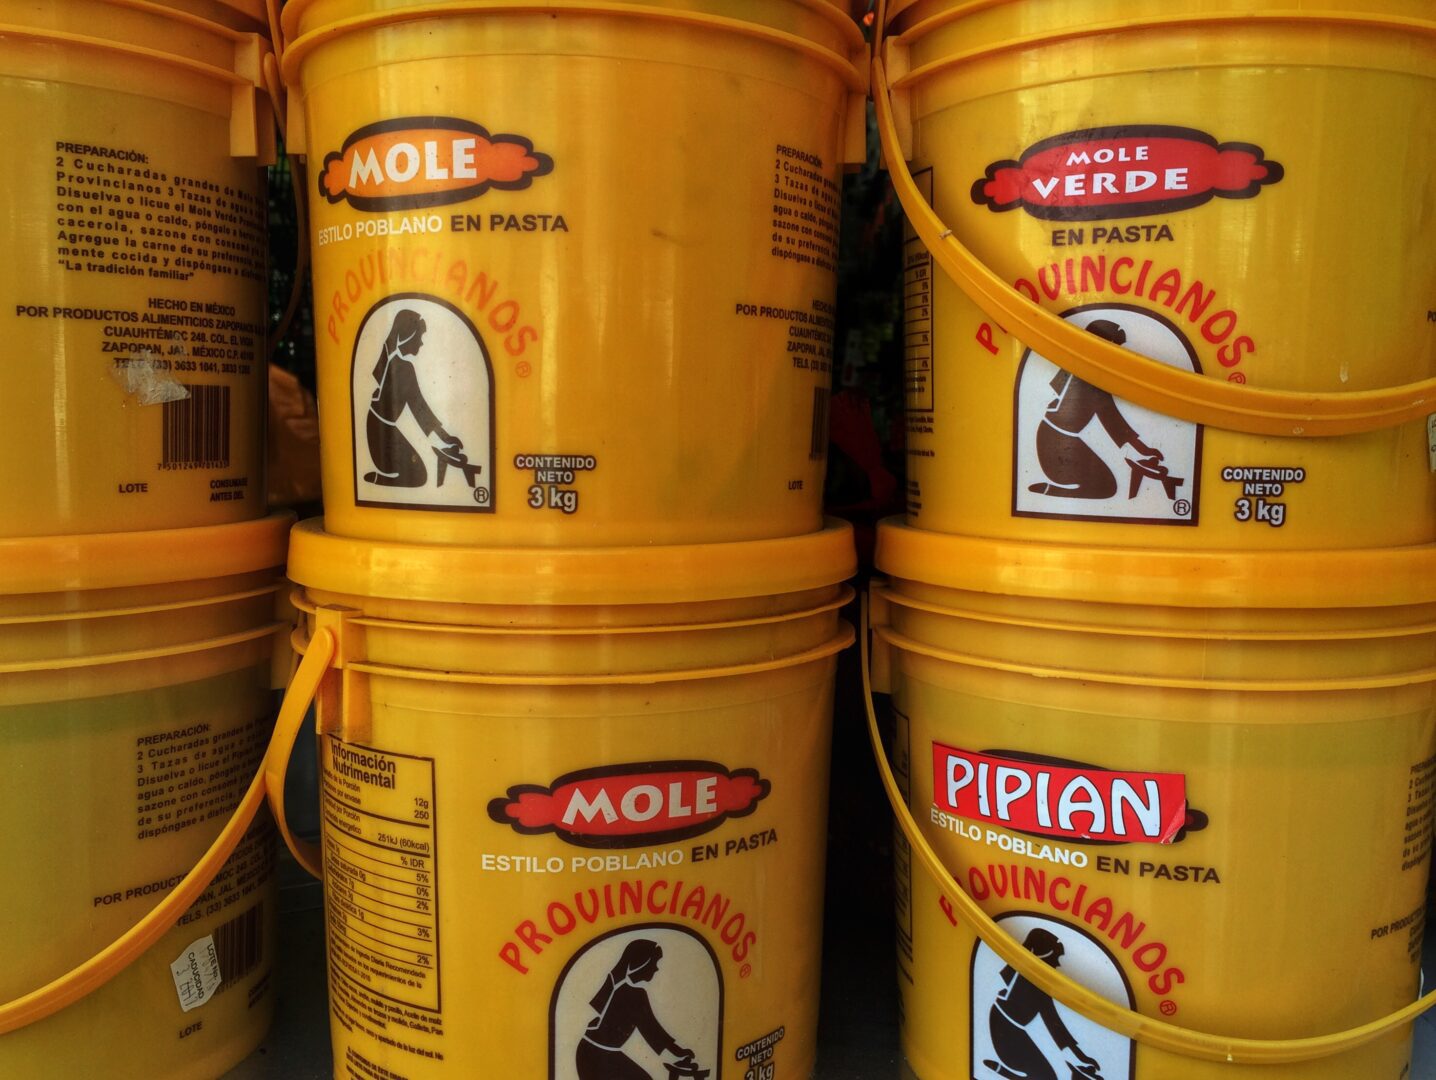 Several yellow buckets are lined up next to each other.